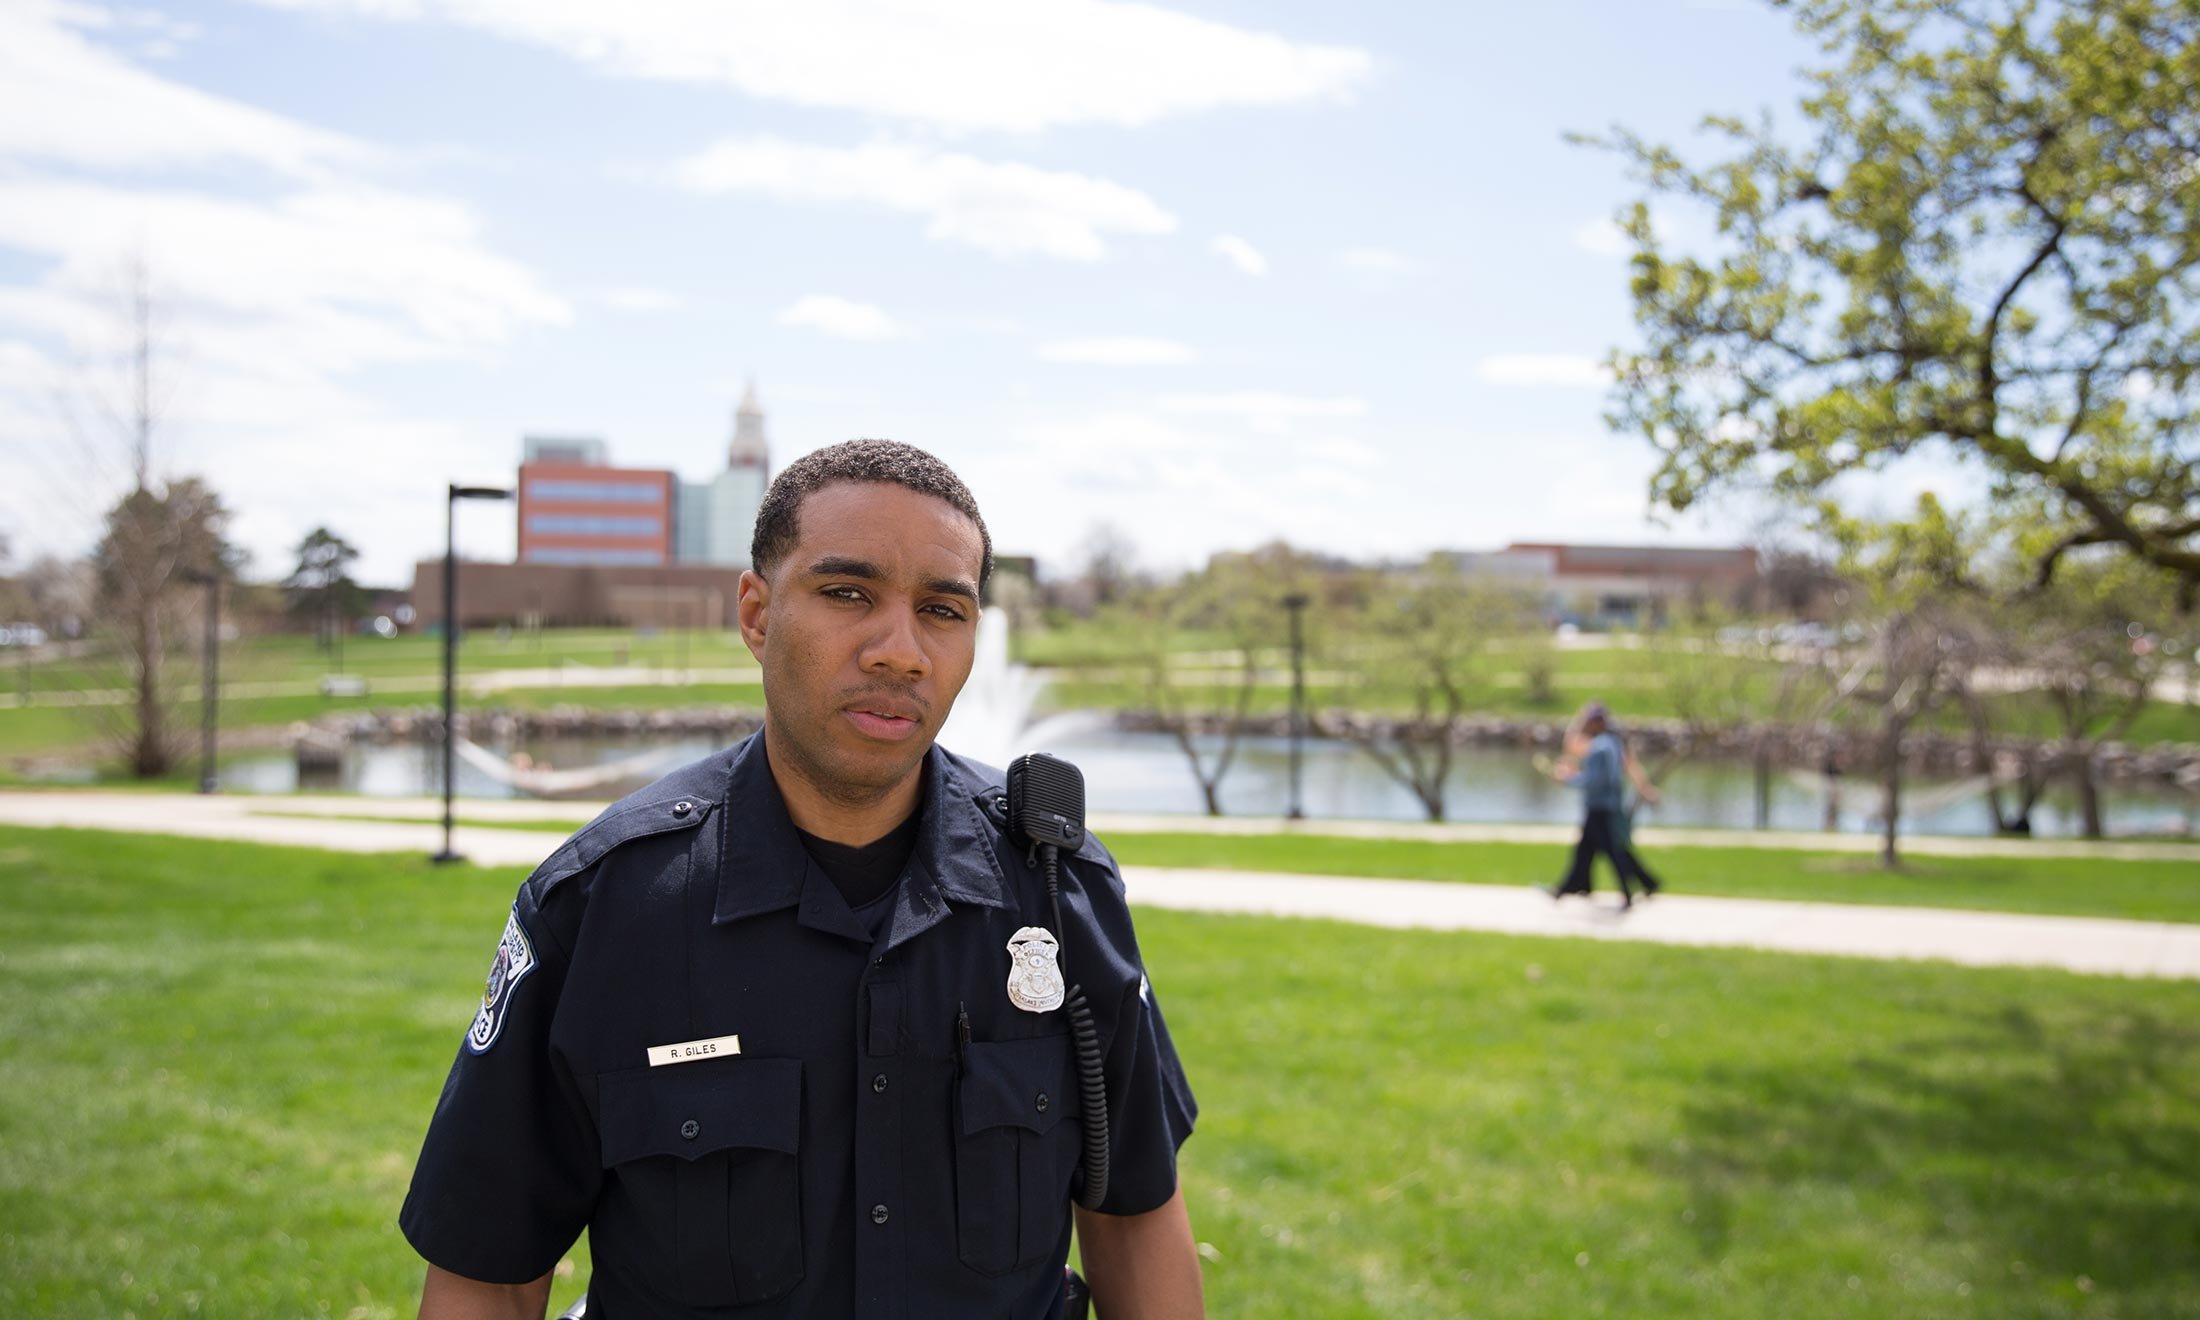 Oakland University Police Department officer Raashan Giles stands outside next to Bear Lake on campus